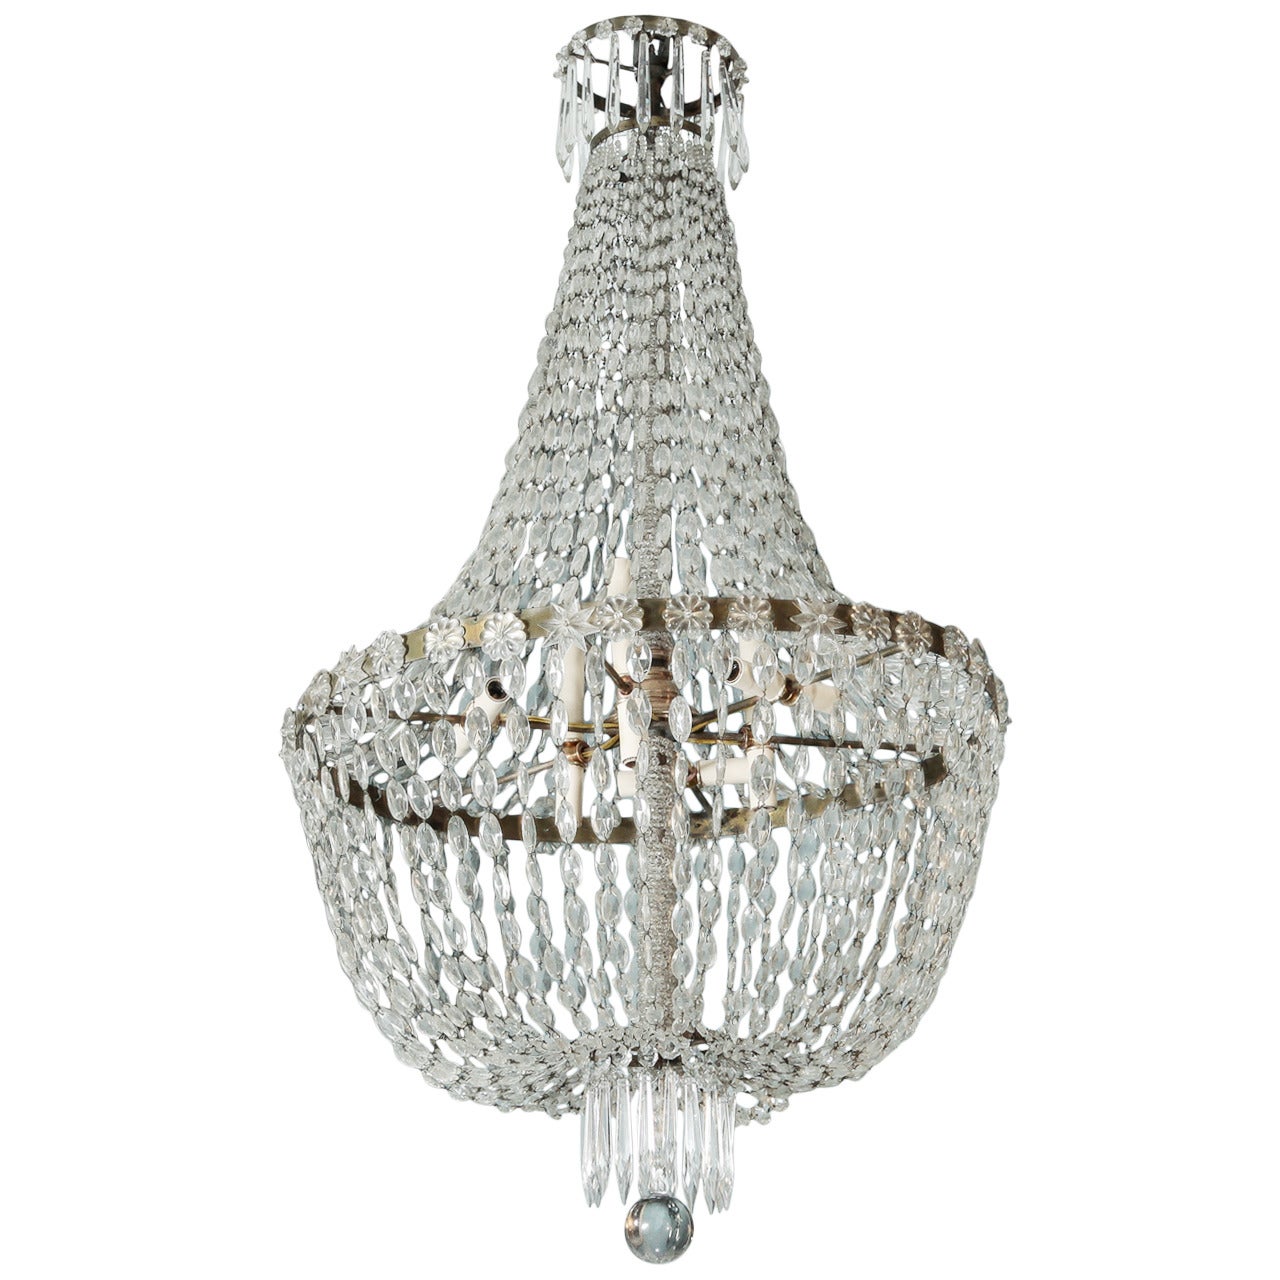 Large All-Crystal Cascade Chandelier with Beaded Center Shaft